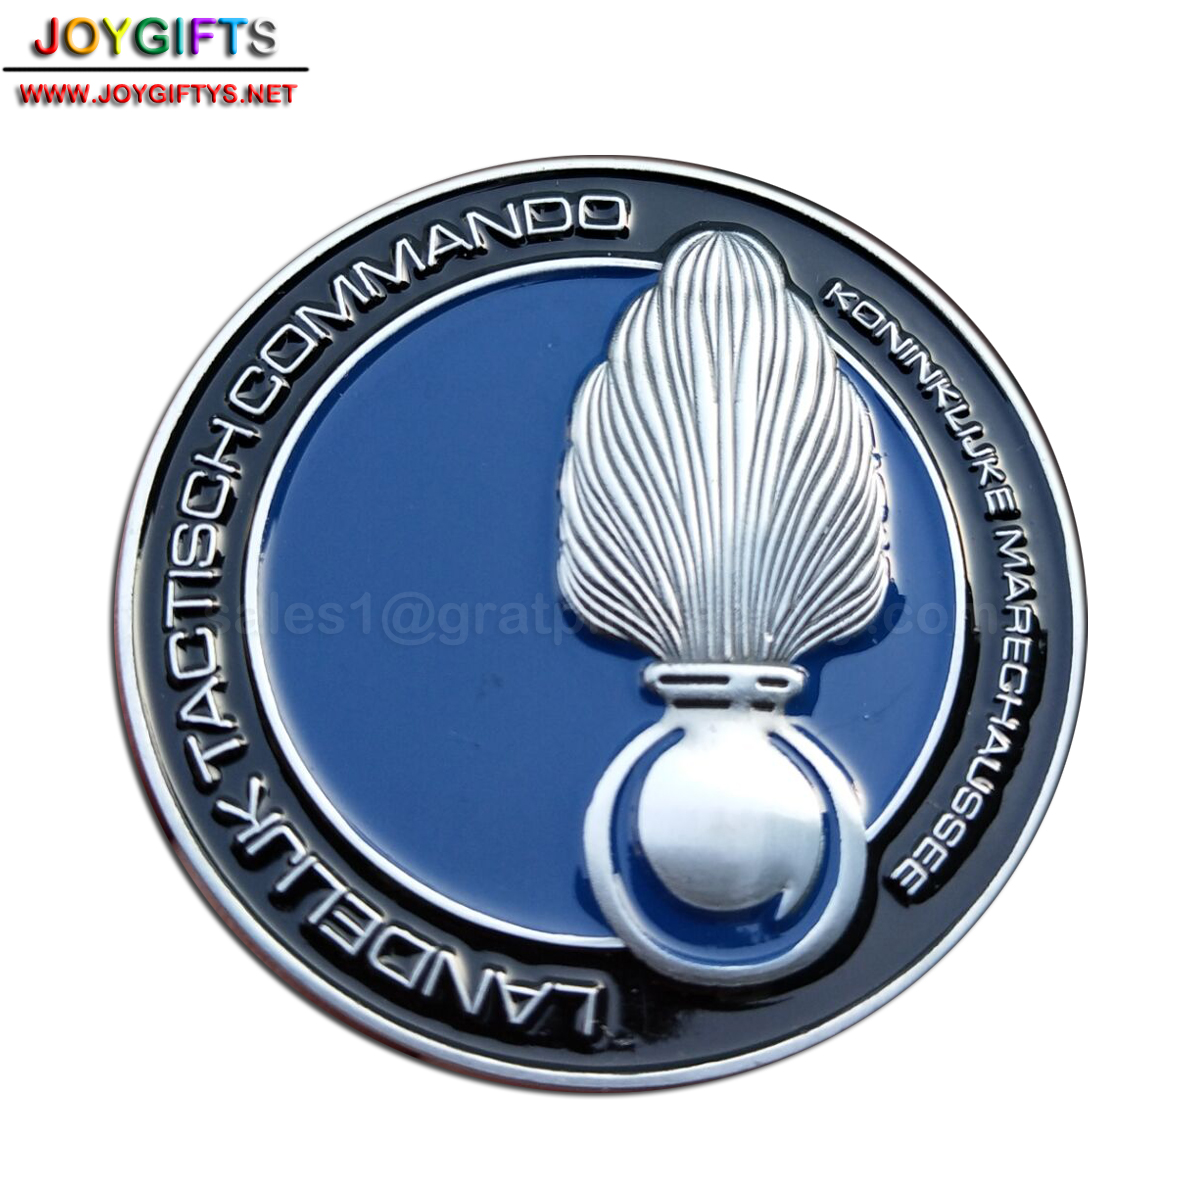 Photo dome challenge coin